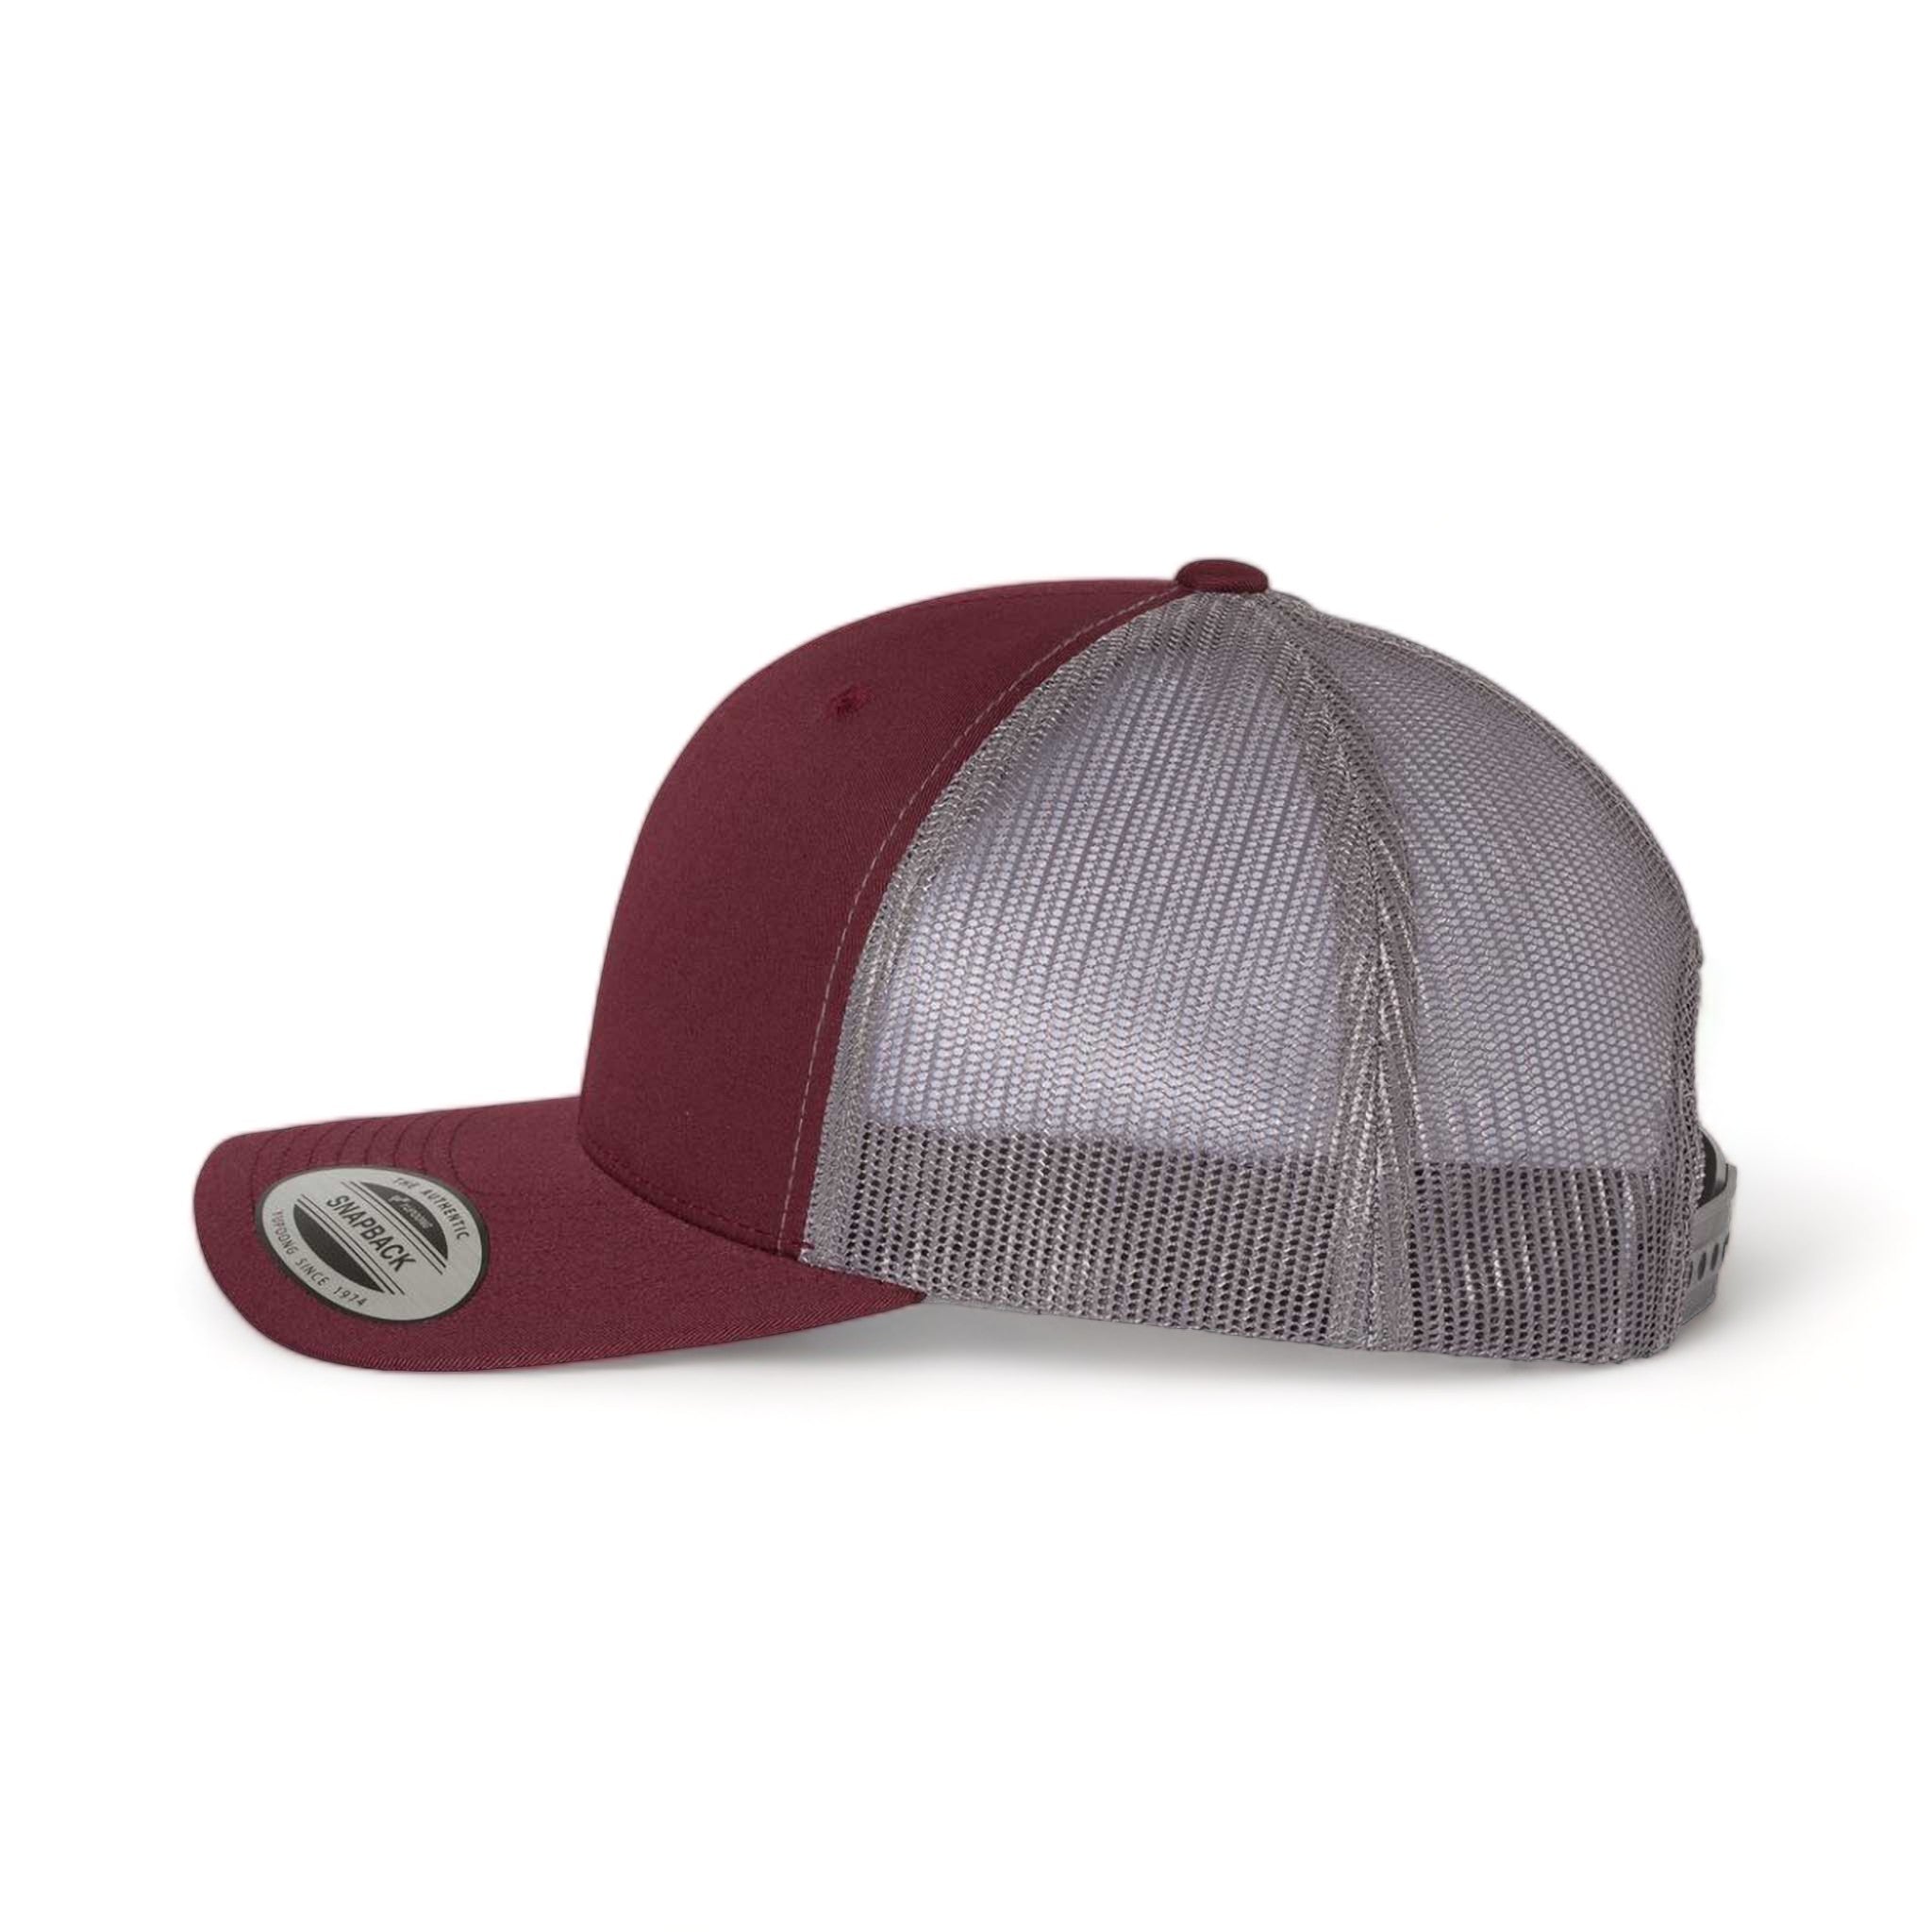 Side view of YP Classics 6606 custom hat in maroon and grey